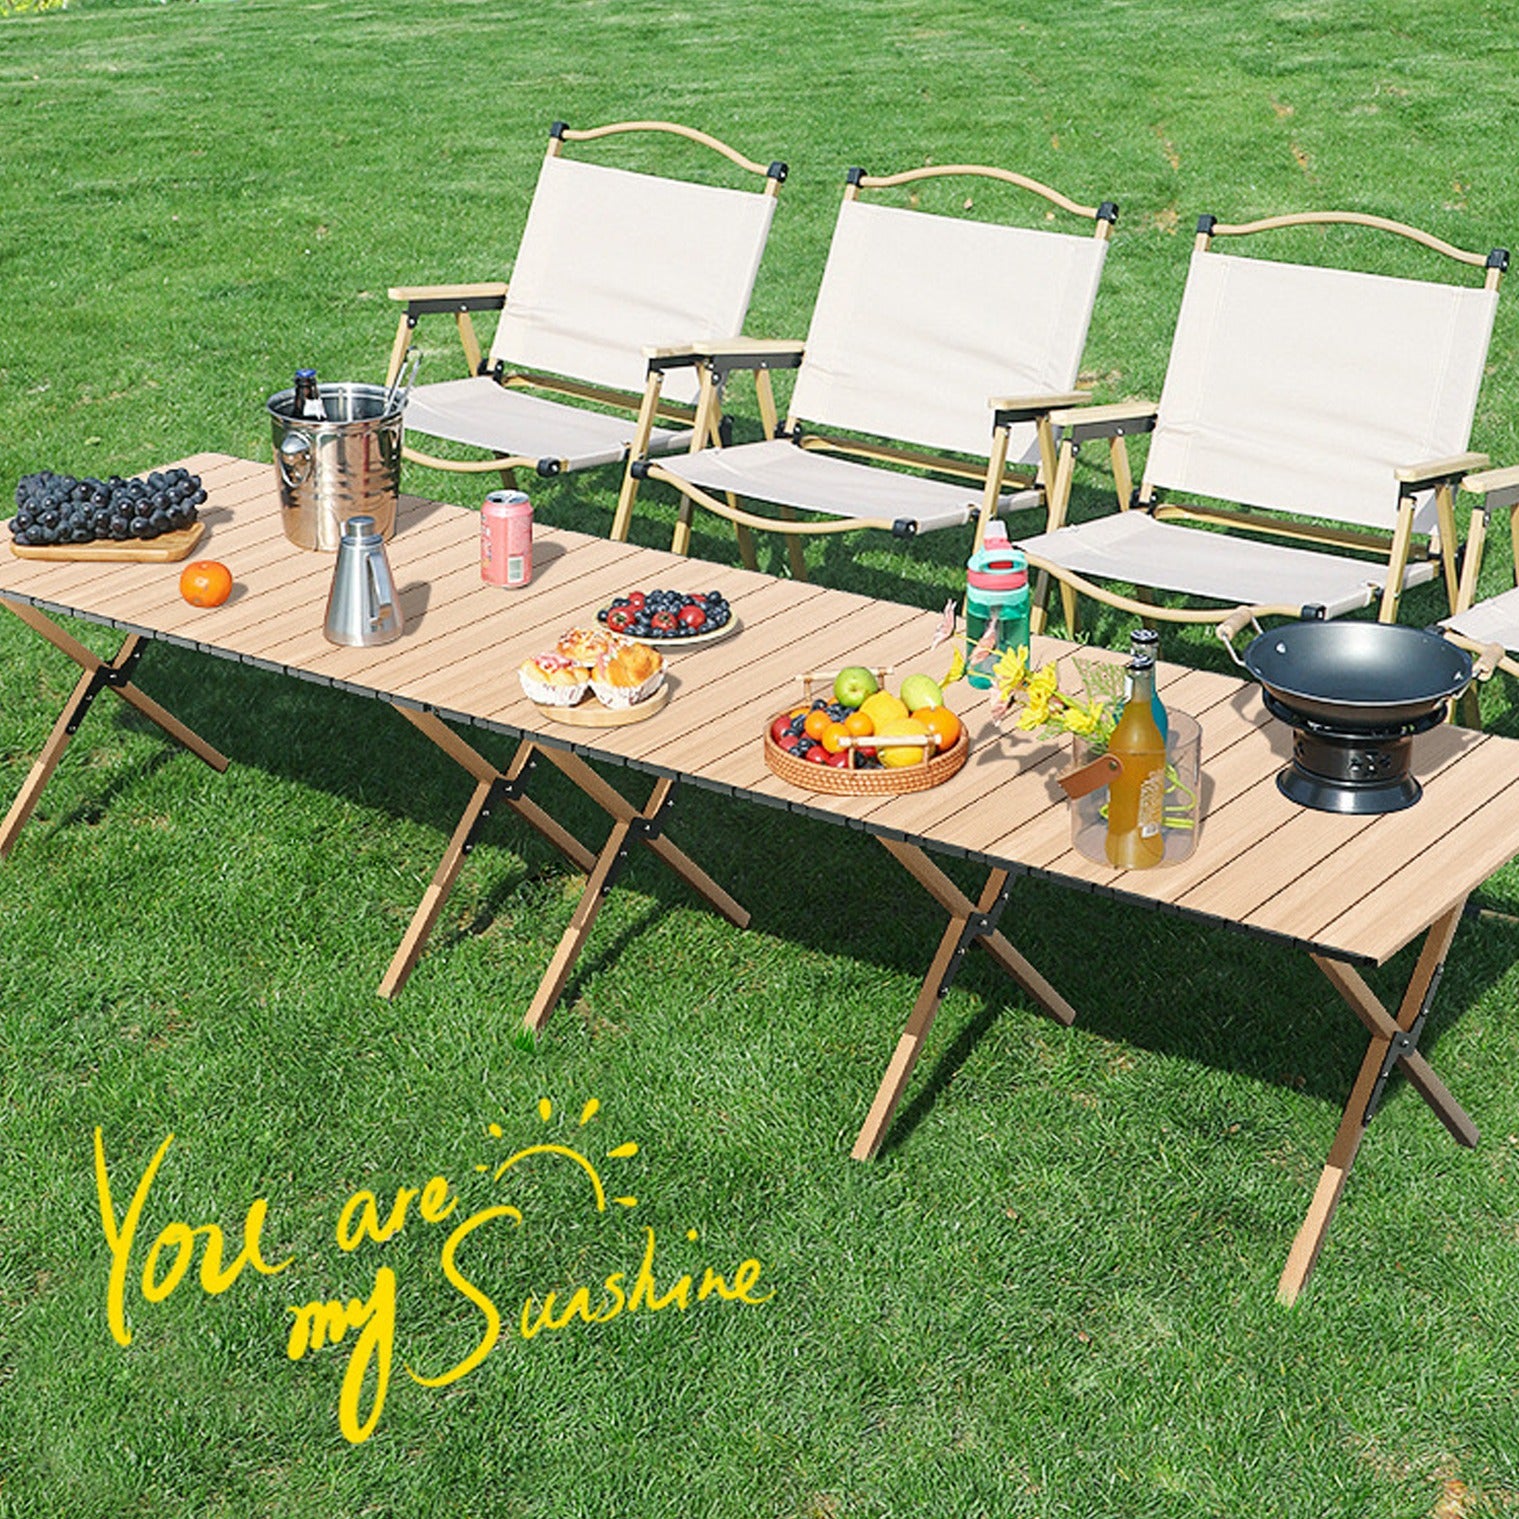 Two Outdoor Portable Camping Tables combined together being used on a picnic and some fruits,snacks,gas stove and other picnic essentials placed on top of it